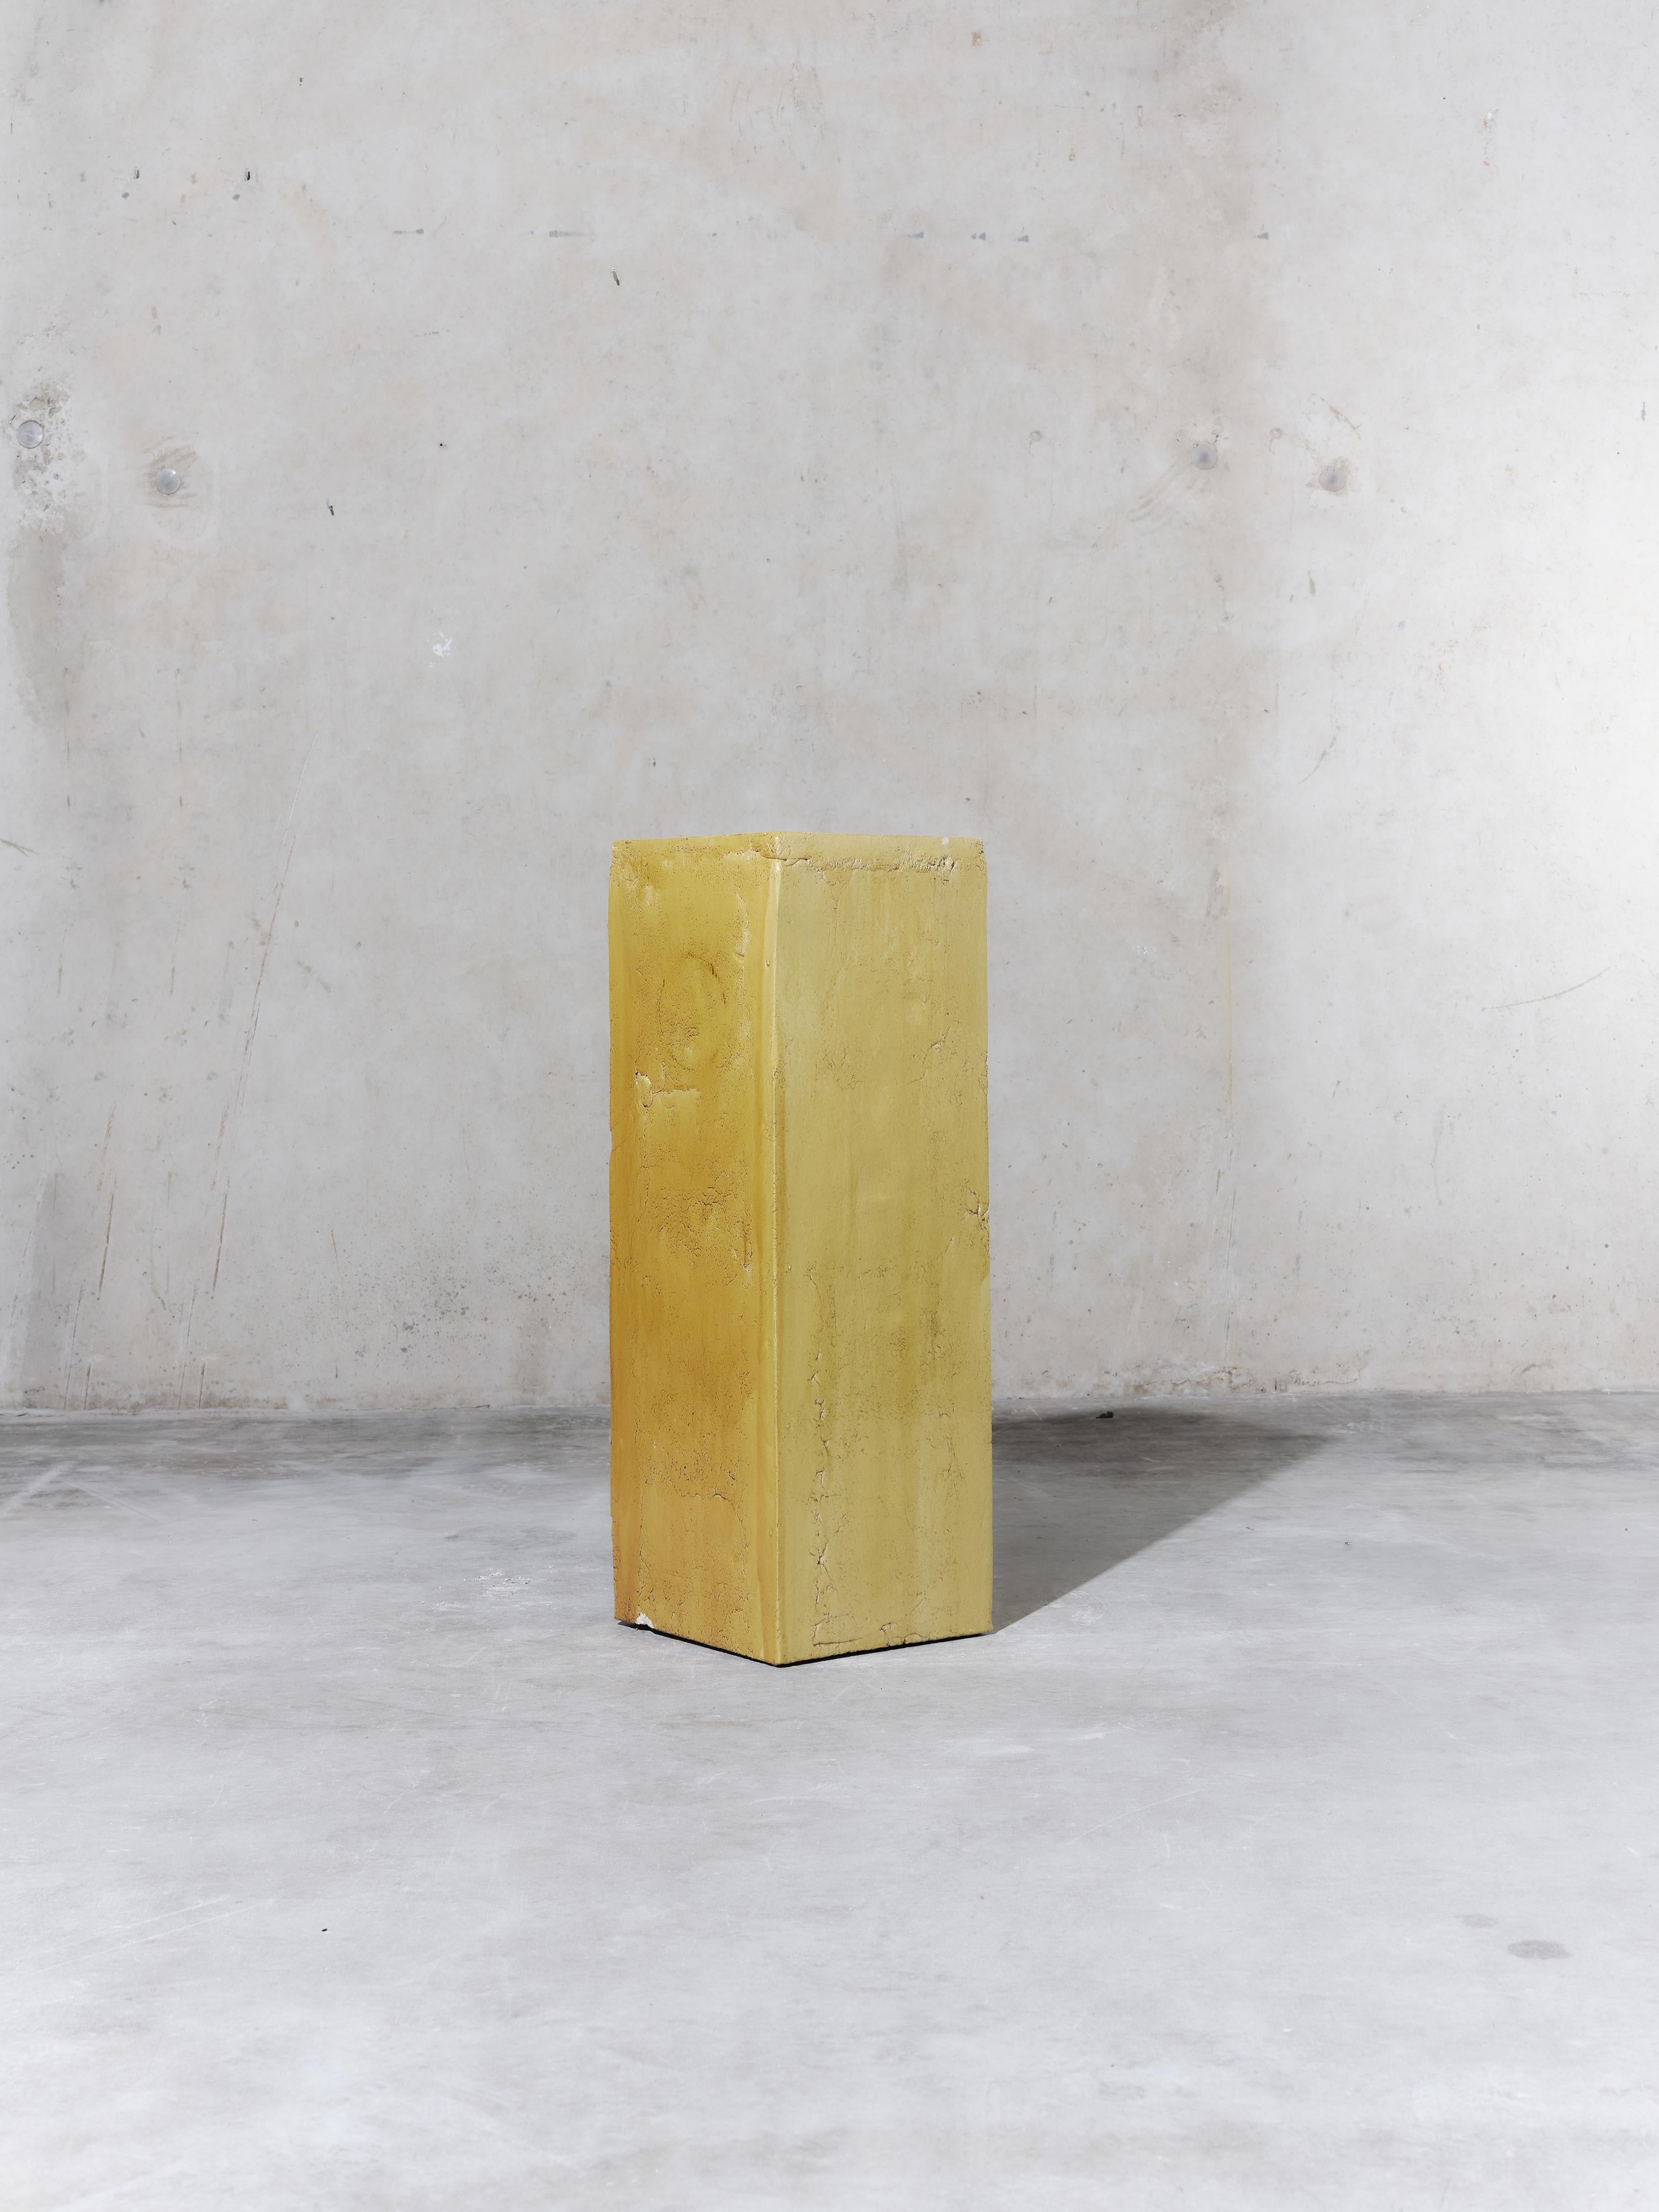 Handmade earthenware side table / pedestal / column manufactured at the workshop of Apparatu in Barcelona. Different clay bodys are mixed with natural fibers like corn, straw, or heather straw. The pieces are casted by hand, creating a thick and